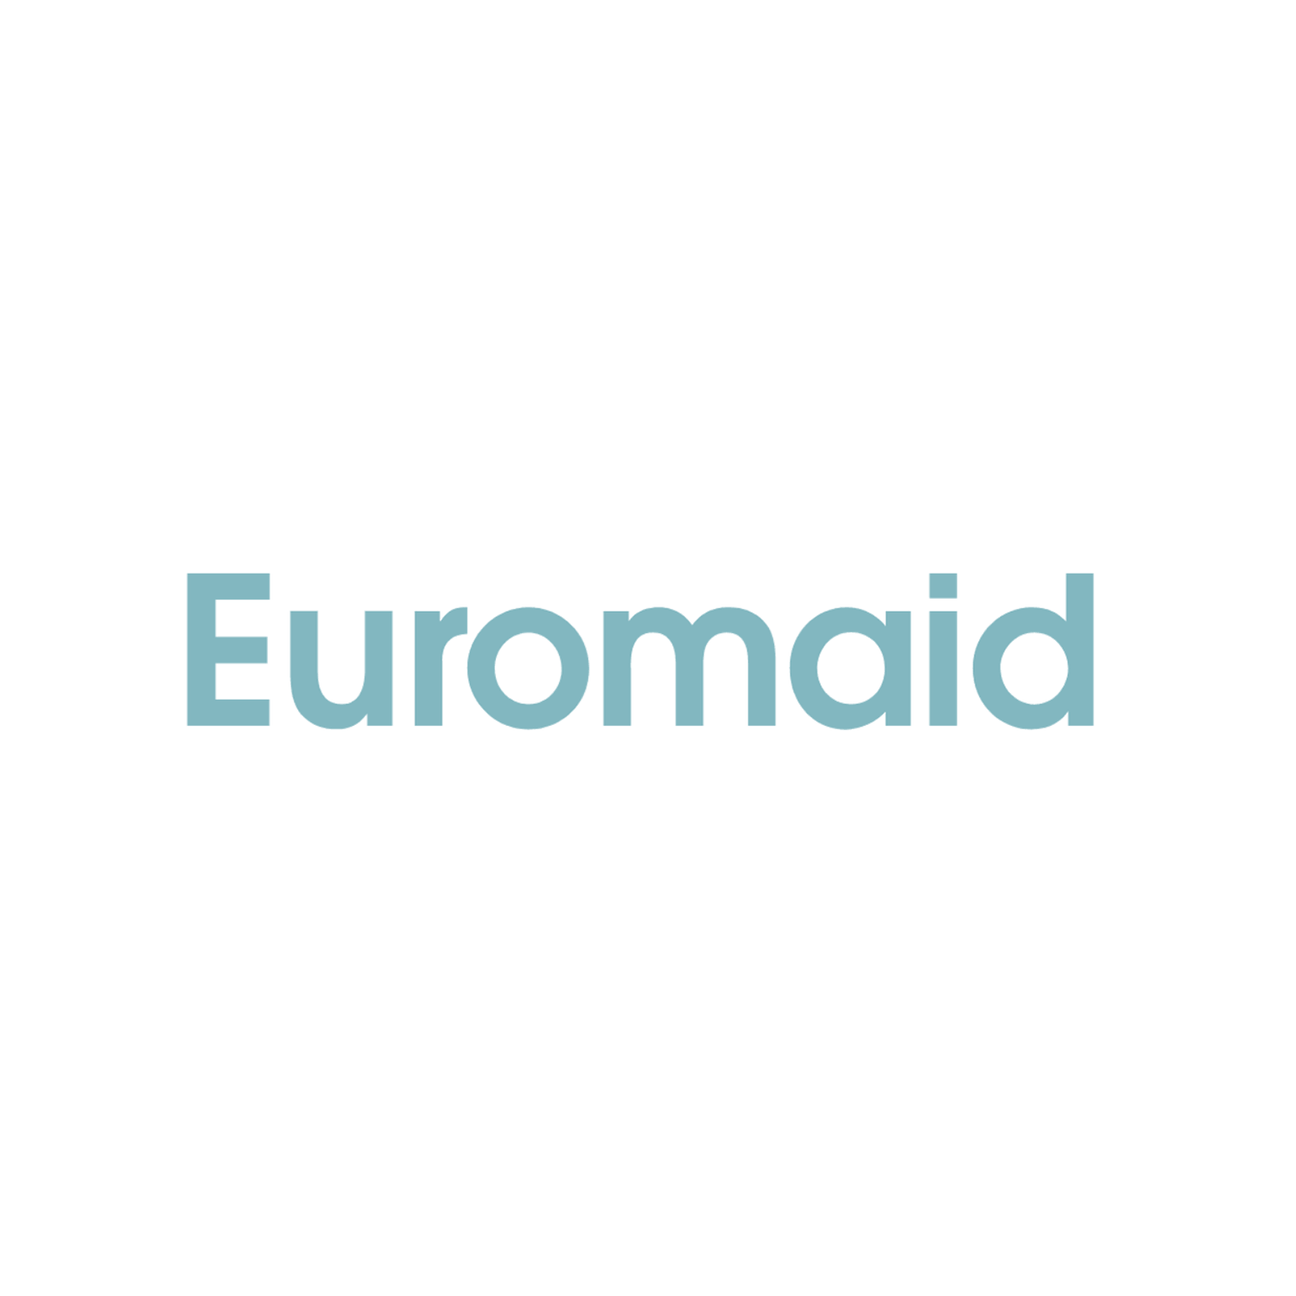 Euromaid - My Oven Spares